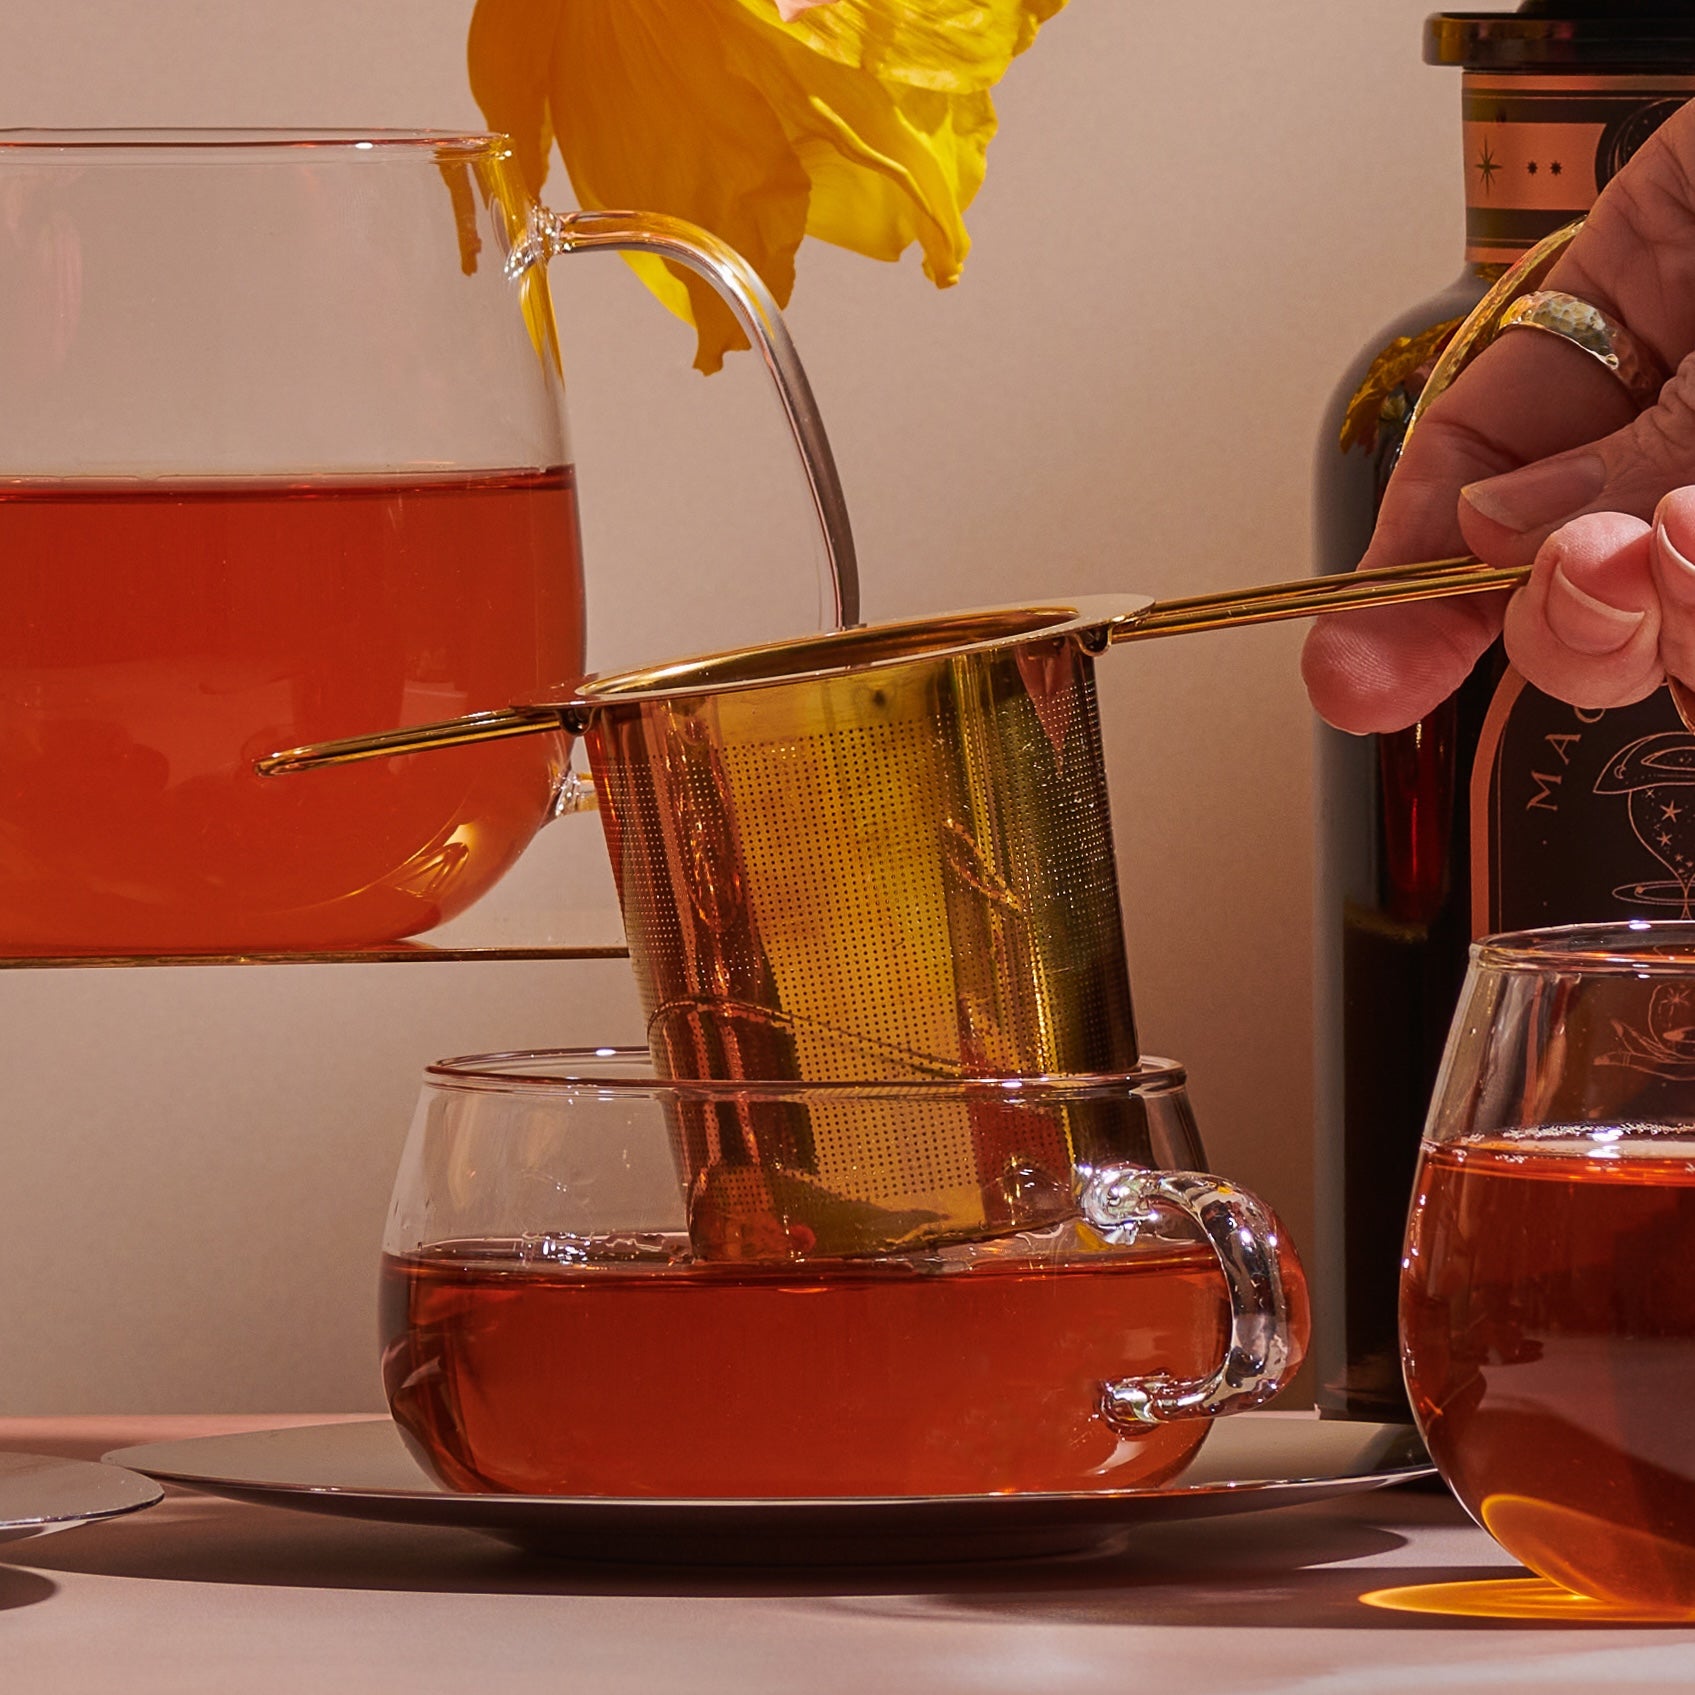 A hand is seen pouring tea through a Midas Touch: Golden-Hued Tea Strainer by PMB Mesh Screen Company into a glass teacup. A teapot filled with amber liquid is also visible. Another teacup is partially seen in the foreground. A daffodil in a glass container and a dark bottle are in the background.